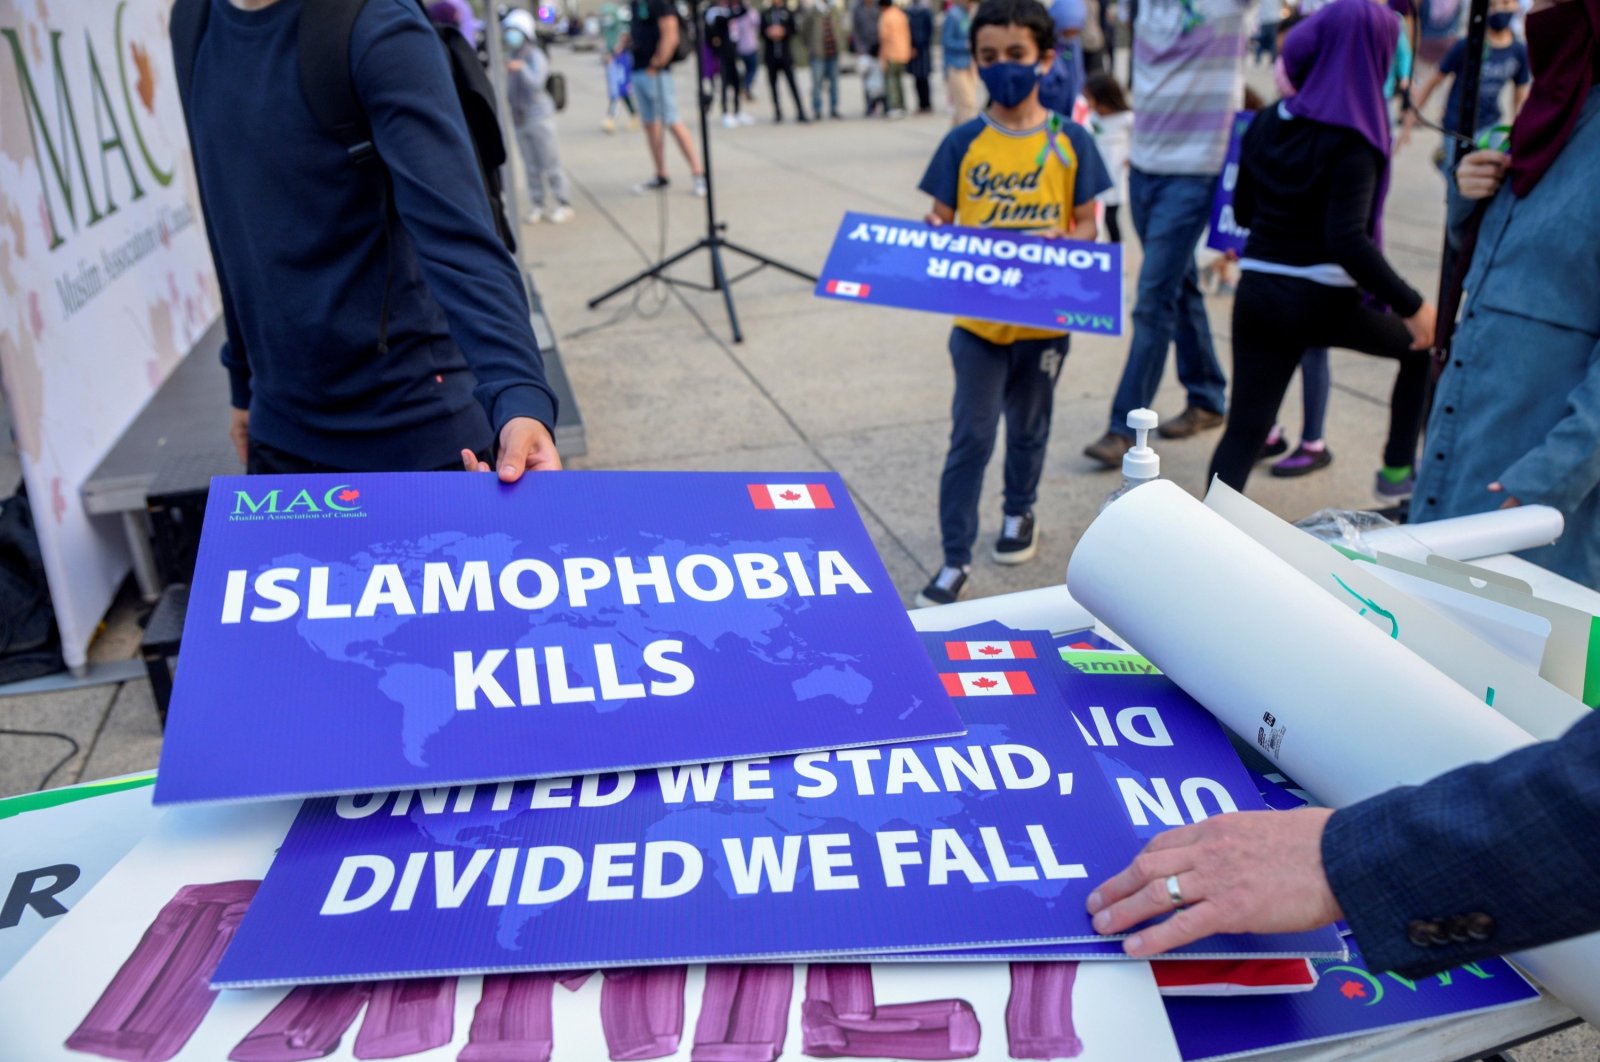 Attendees return signs after a rally to highlight Islamophobia, in Toronto, Ontario, Canada, June 18, 2021. (Reuters Photo)